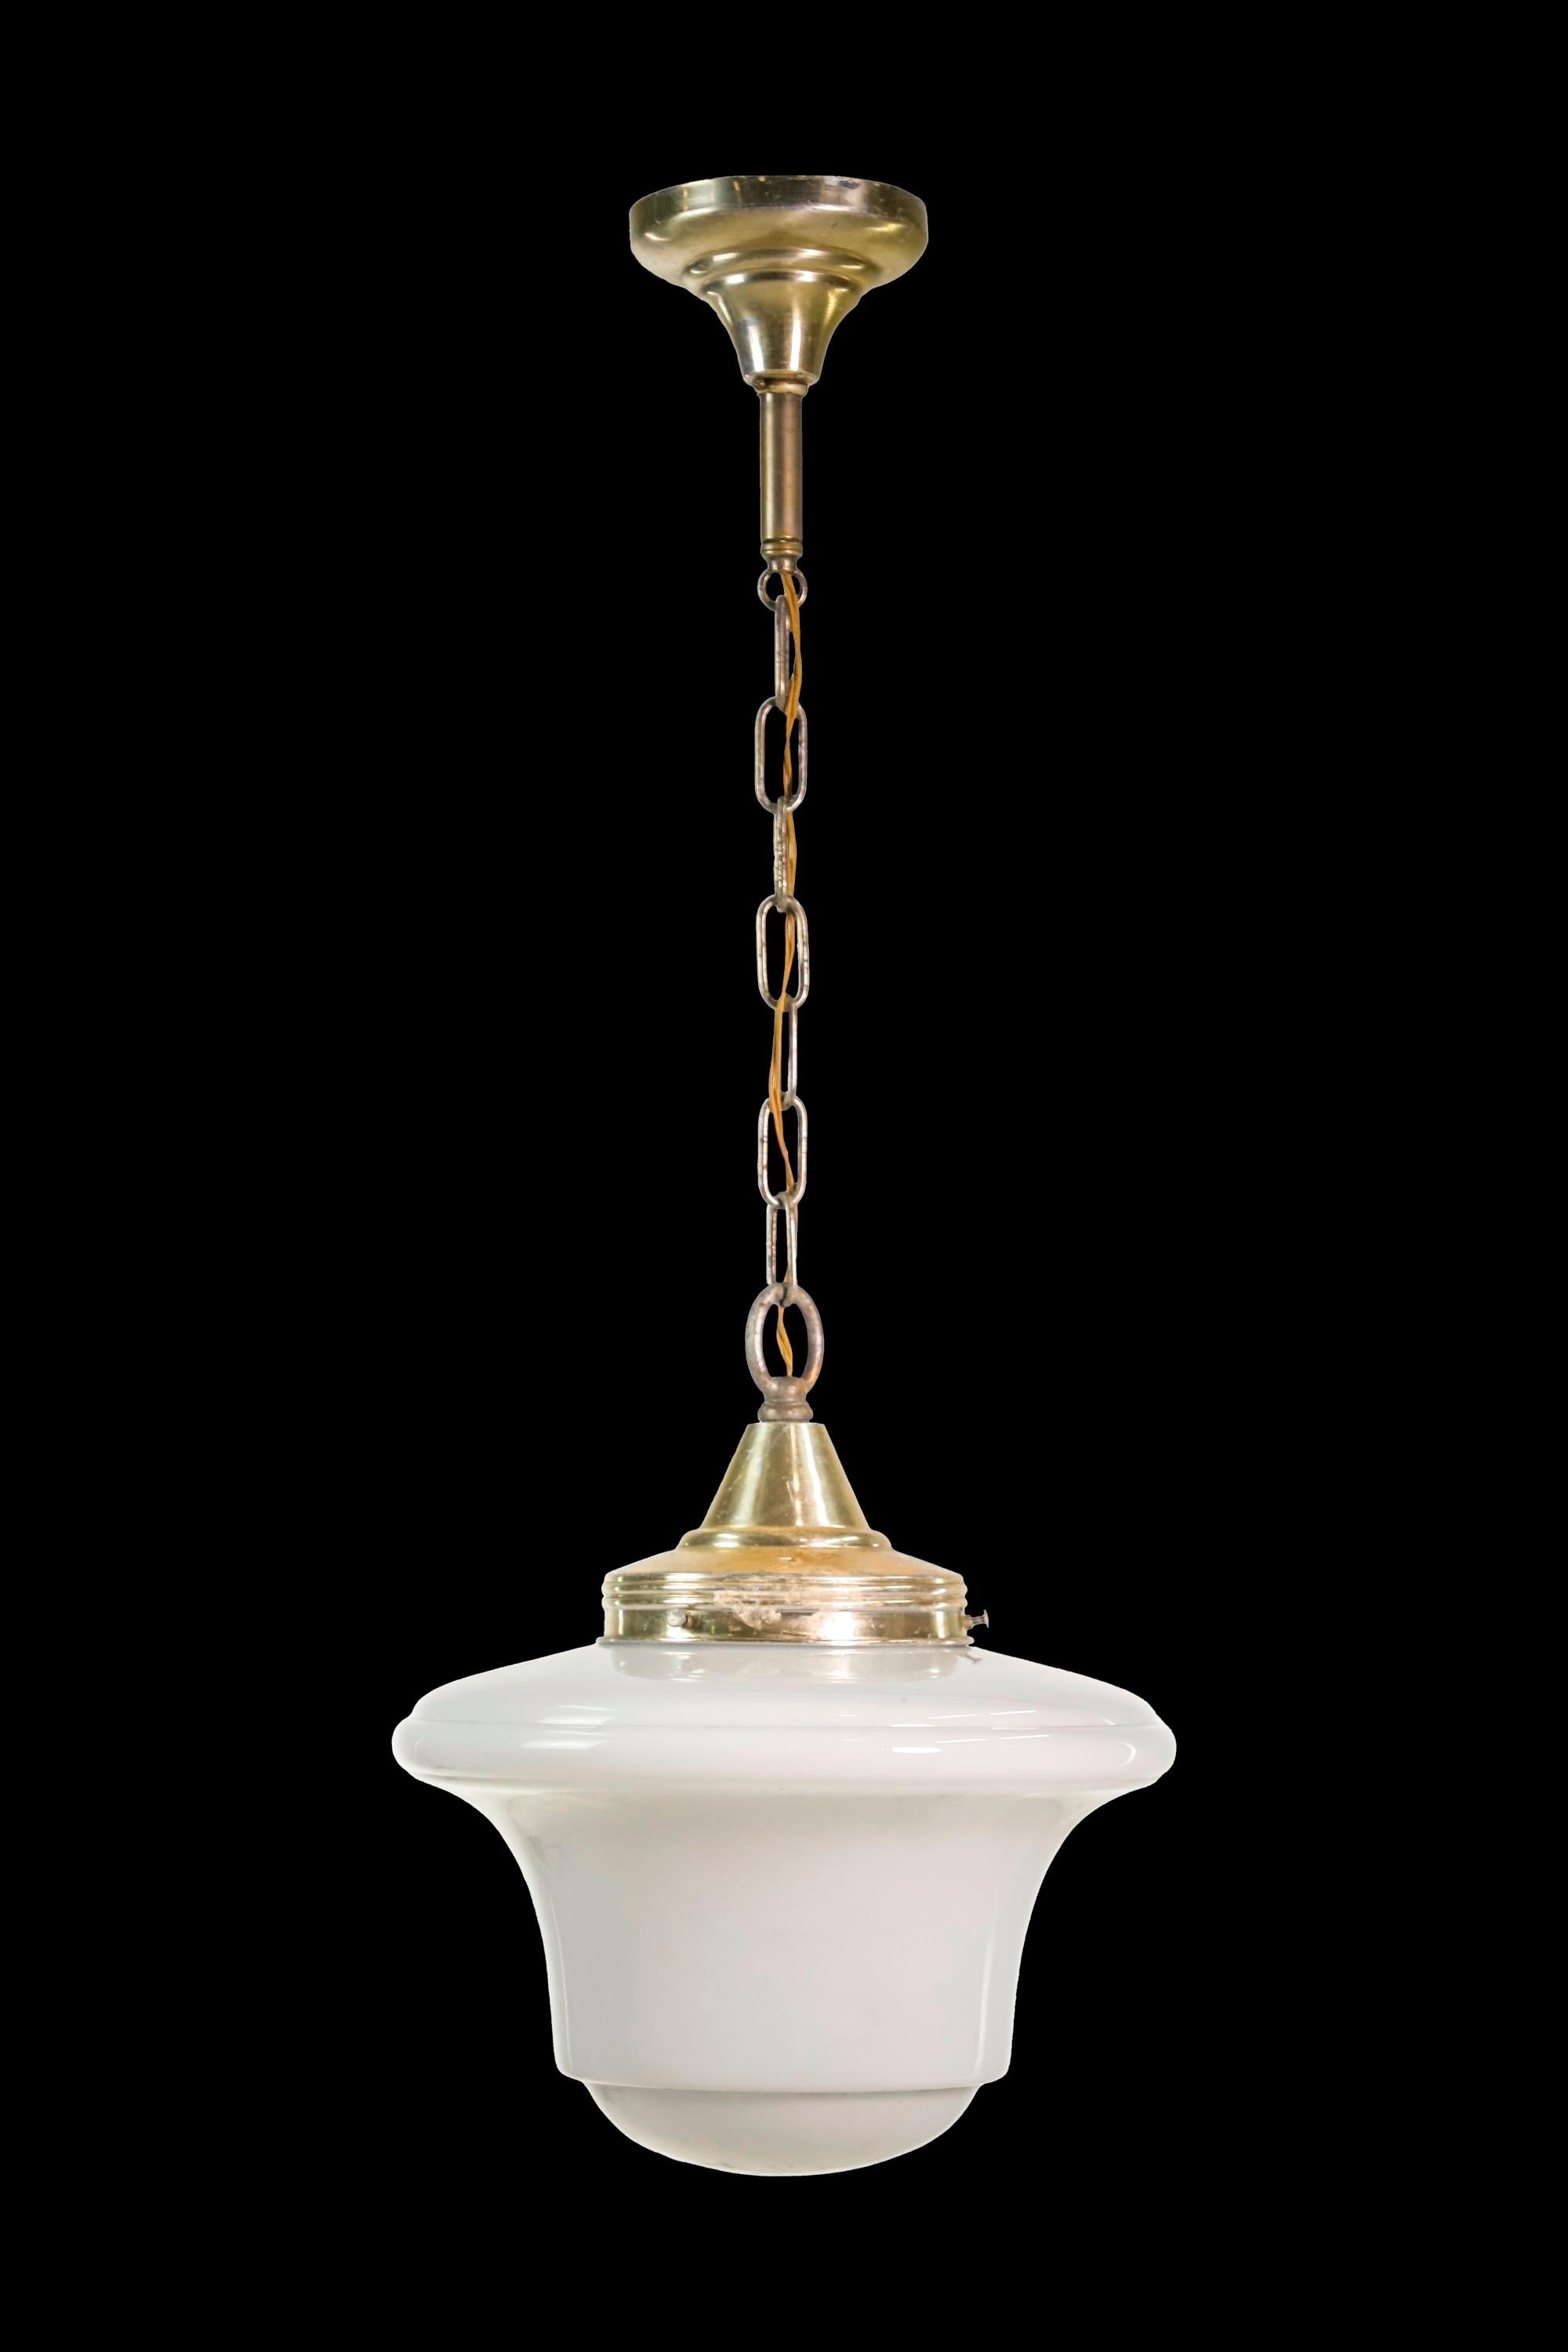 20th century Schoolhouse pendant light featuring a white glass shade and polished brass hardware. Take one standard medium base lightbulb. Cleaned and restored. Please note, this item is located in one of our NYC locations.